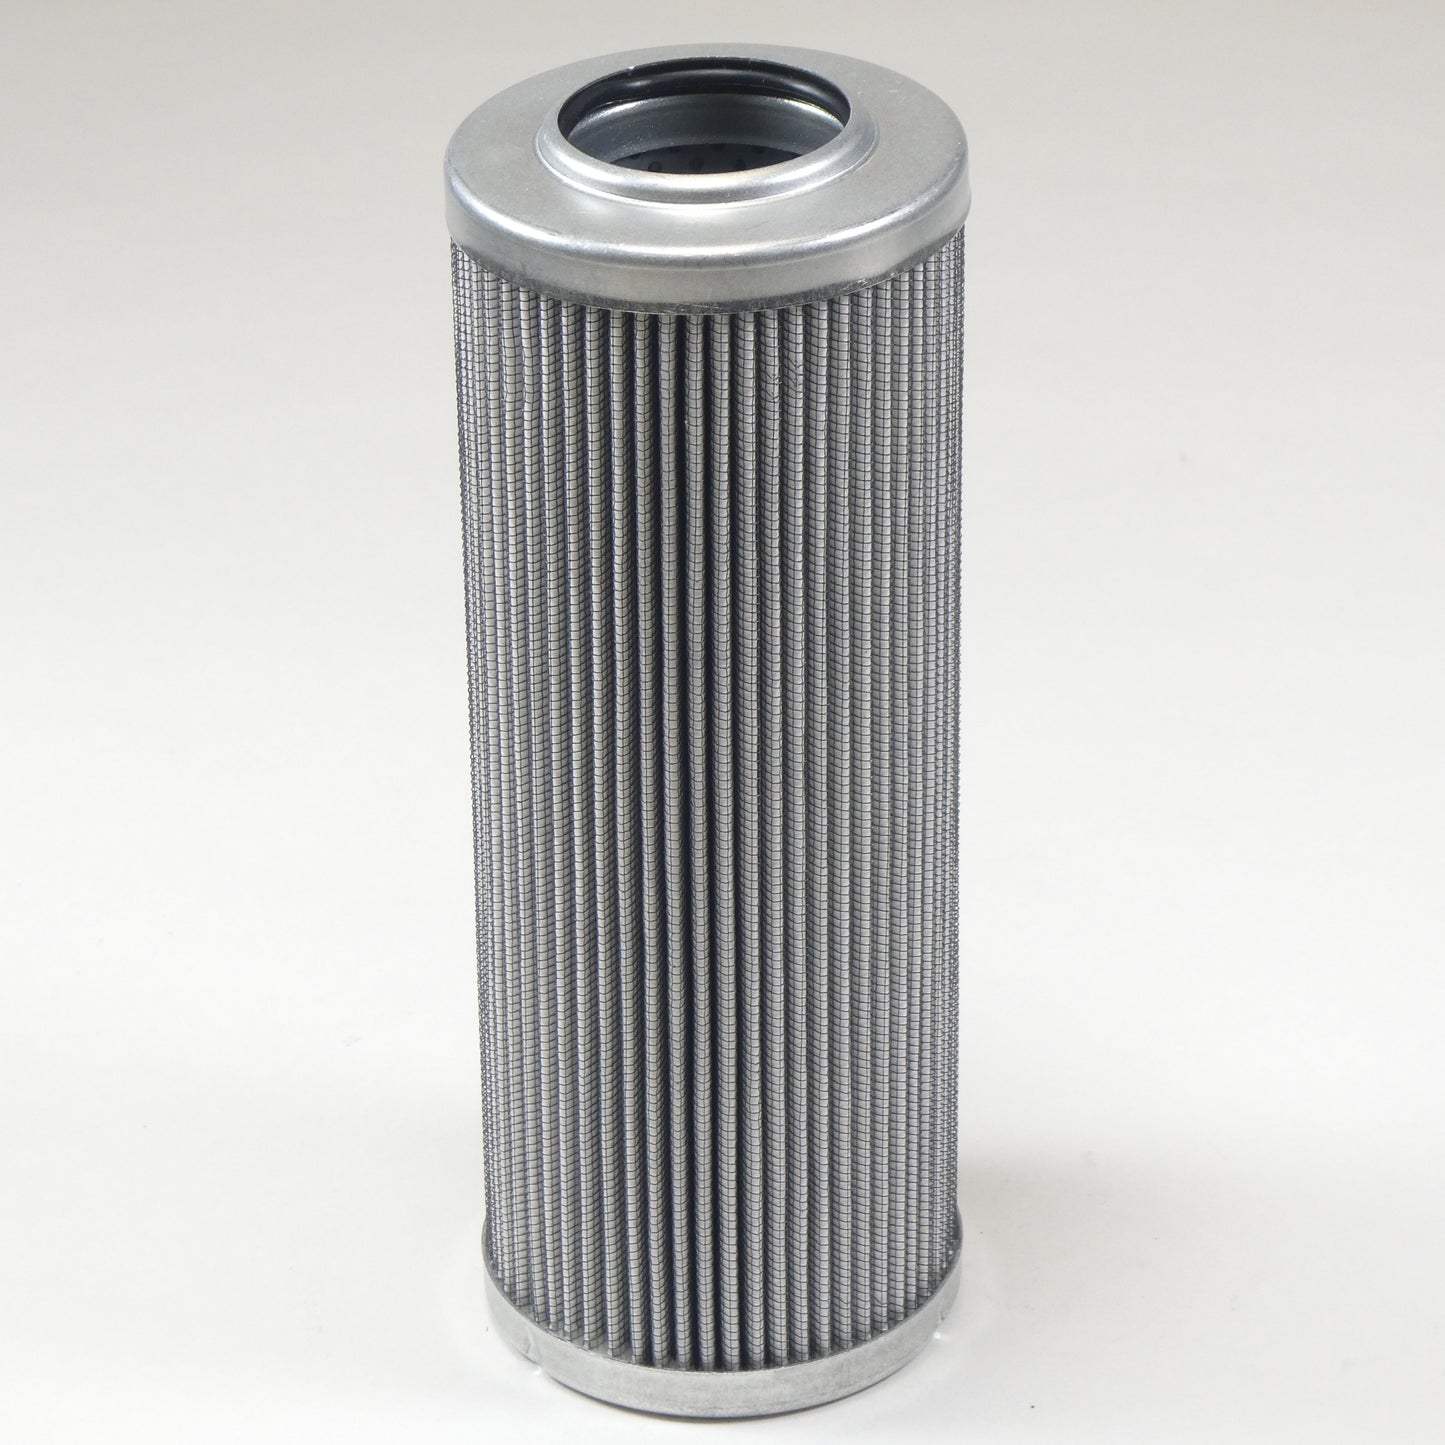 Hydrafil Replacement Filter Element for Hilco 3830-03-039-C